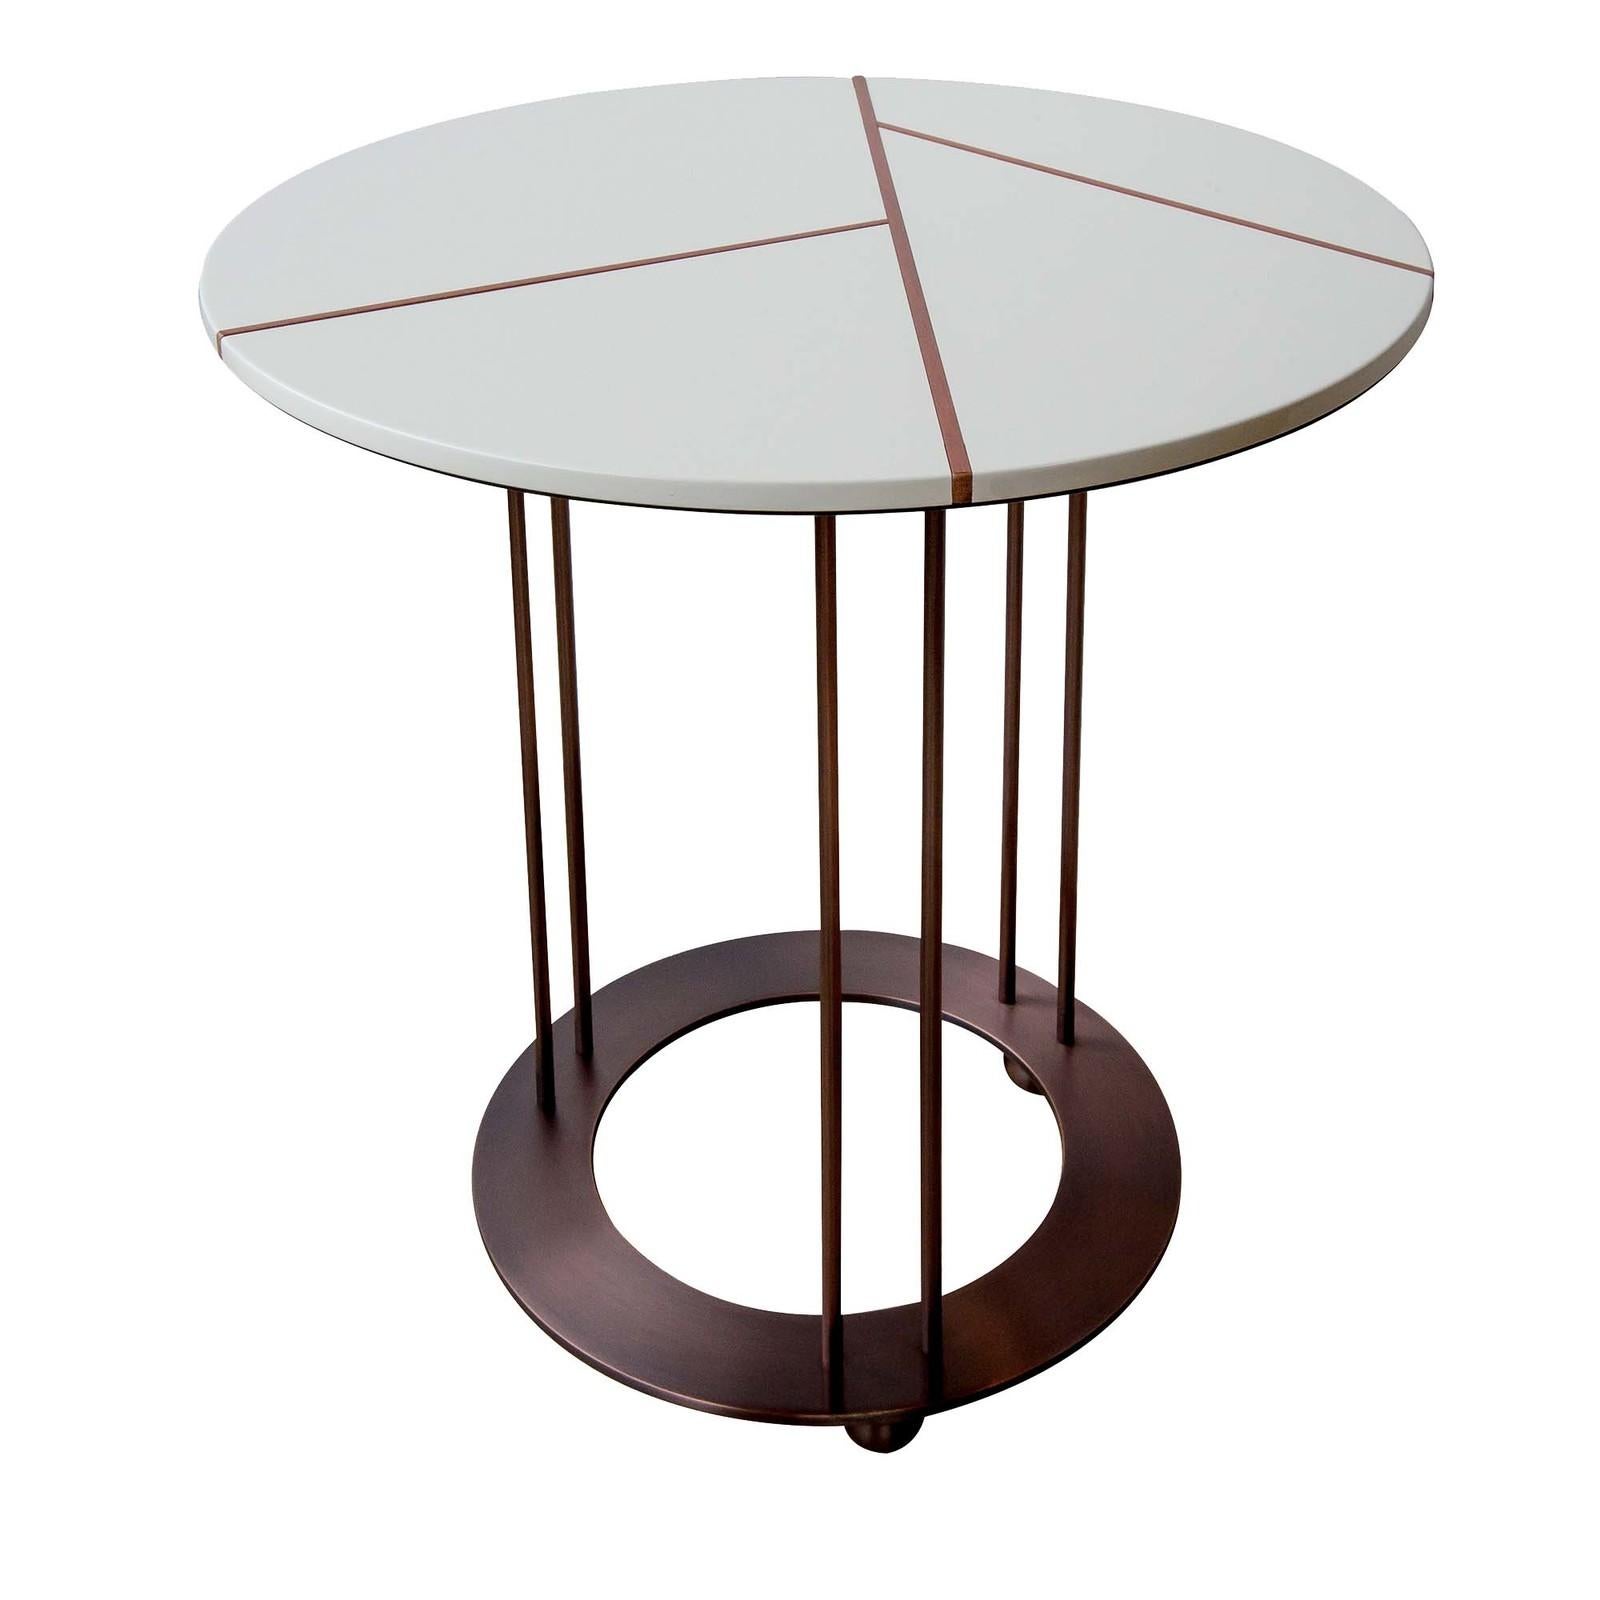 Defined by simple lines and colors, this tall side table will elegantly frame any bed or sofa in a modern interior. The round wood top, lacquered in ivory polyurethane with a glossy finish, features a linear inlay pattern in copper leaf slats that